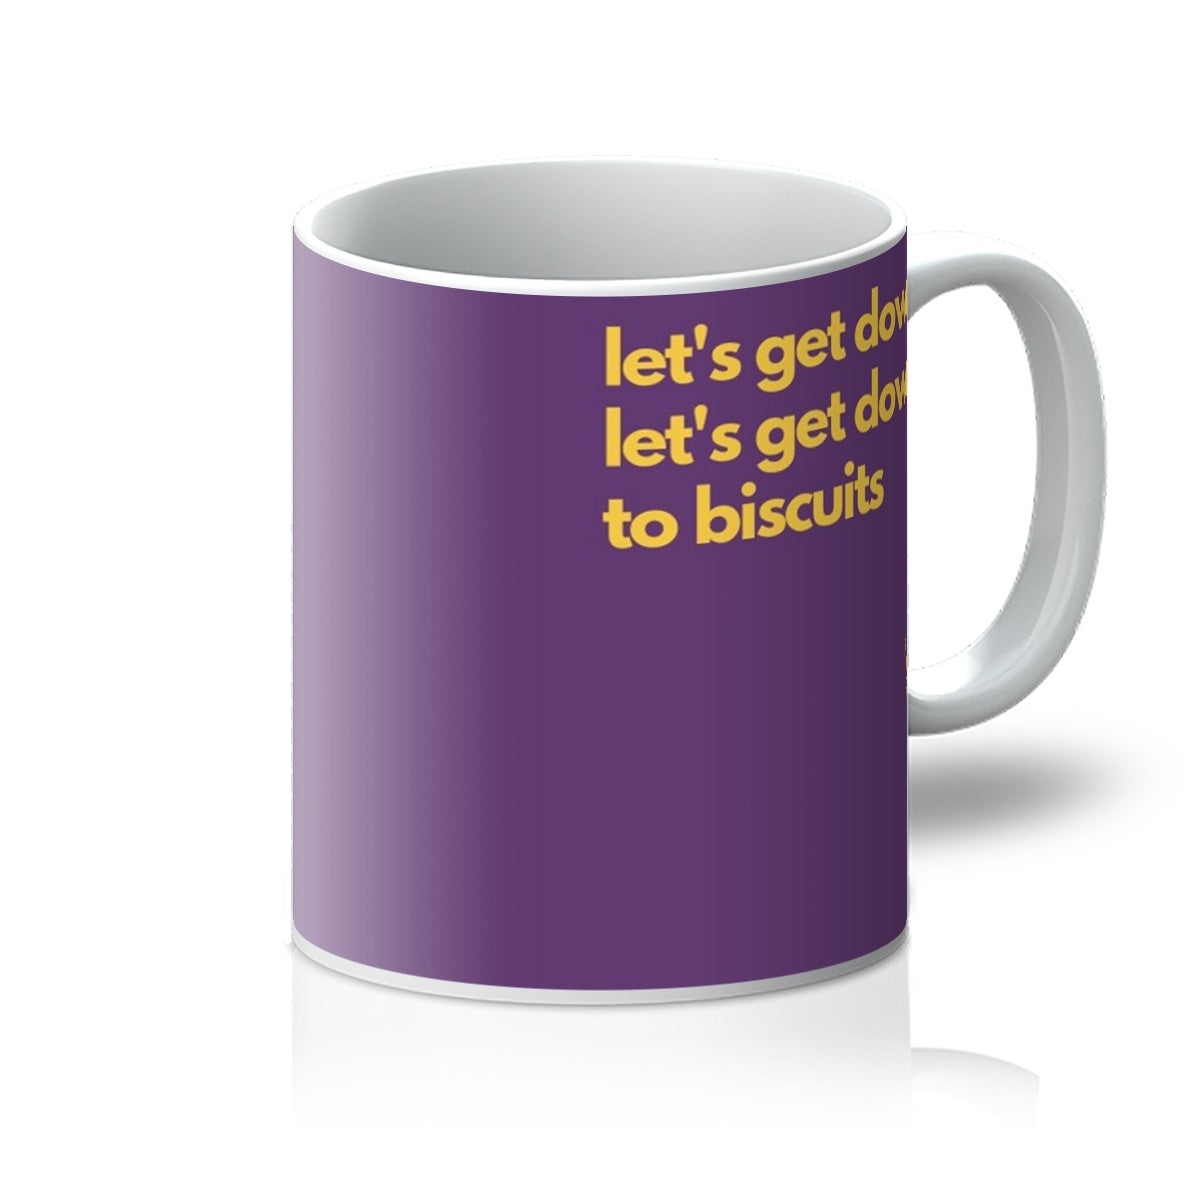 let's get down to biscuits mug purple right